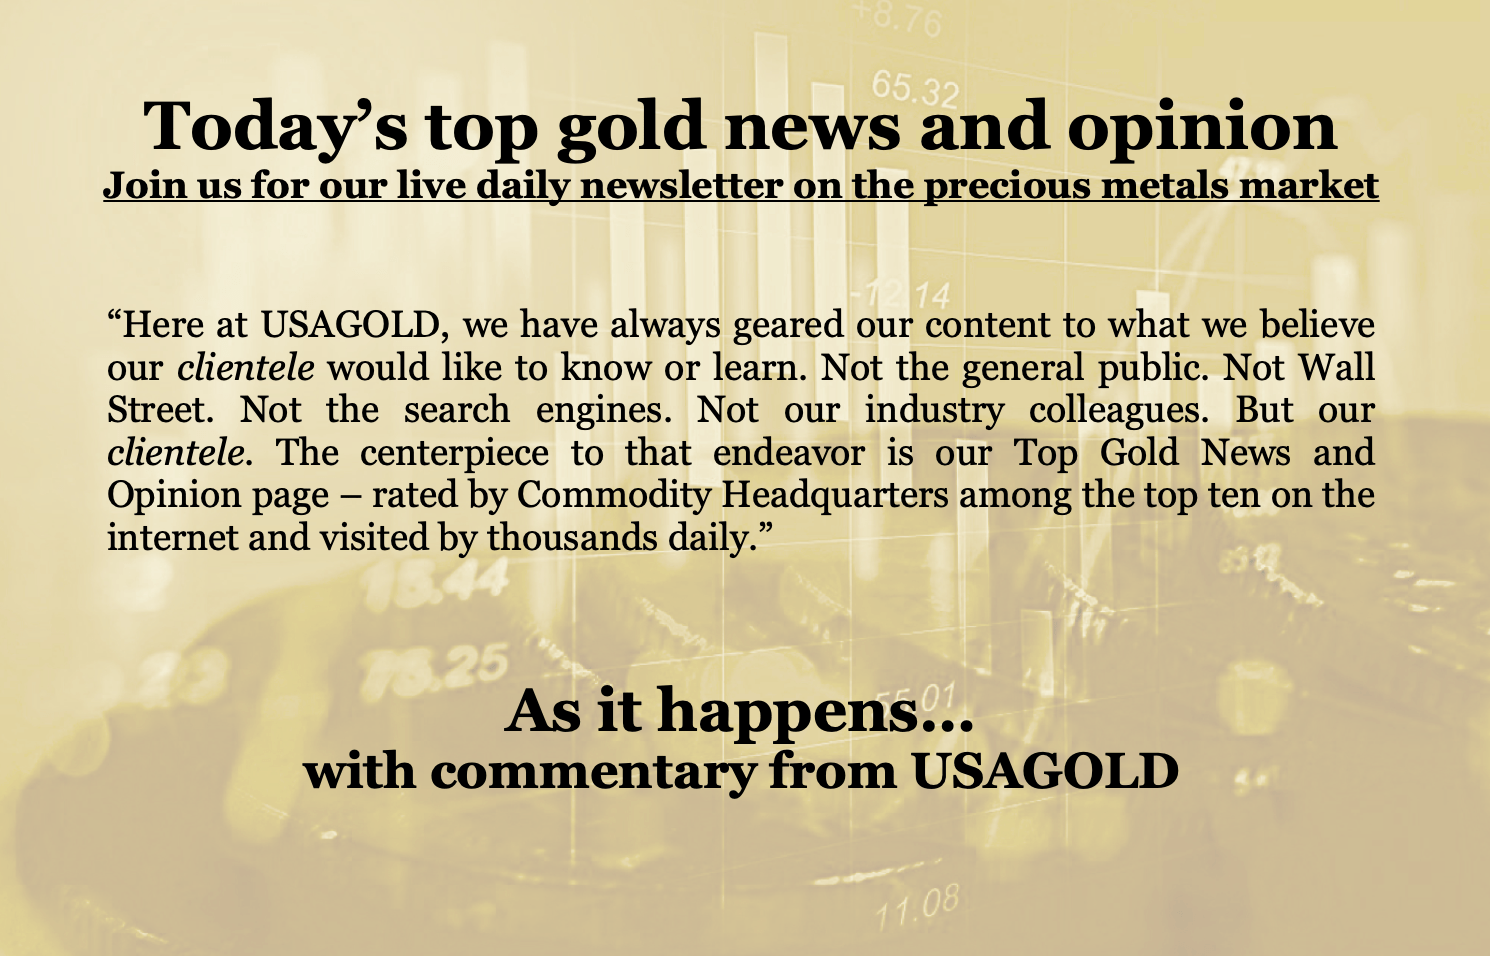 advertisement for USAGOLD's top gold news and opinion page